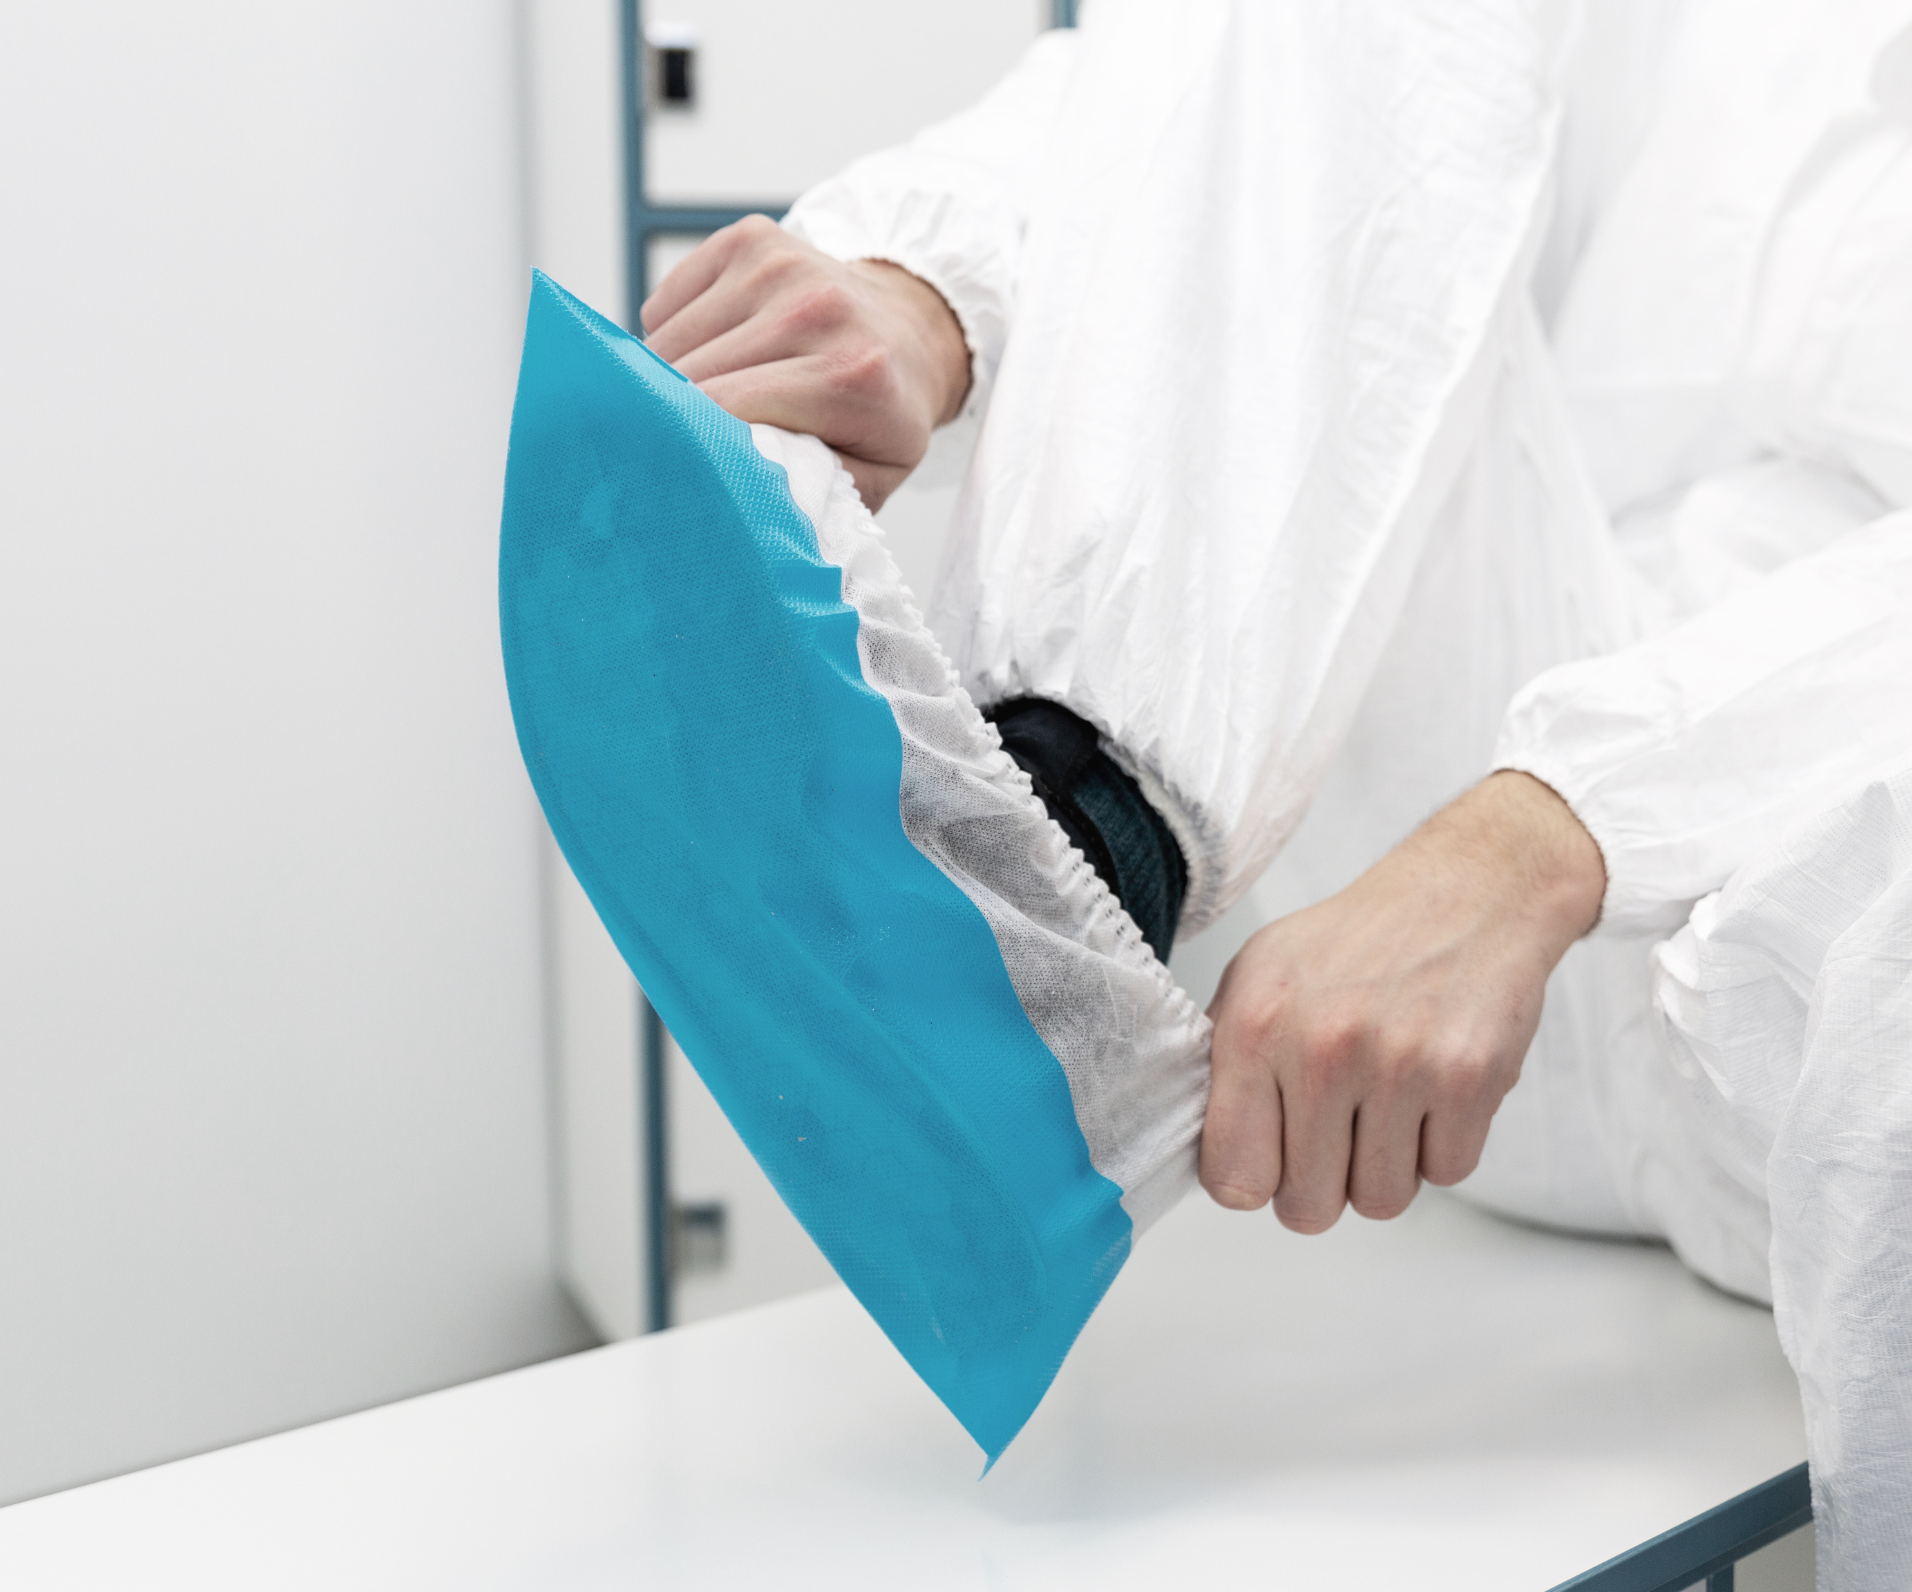 Cleanroom Services Checklist | All Things Cleanrooms